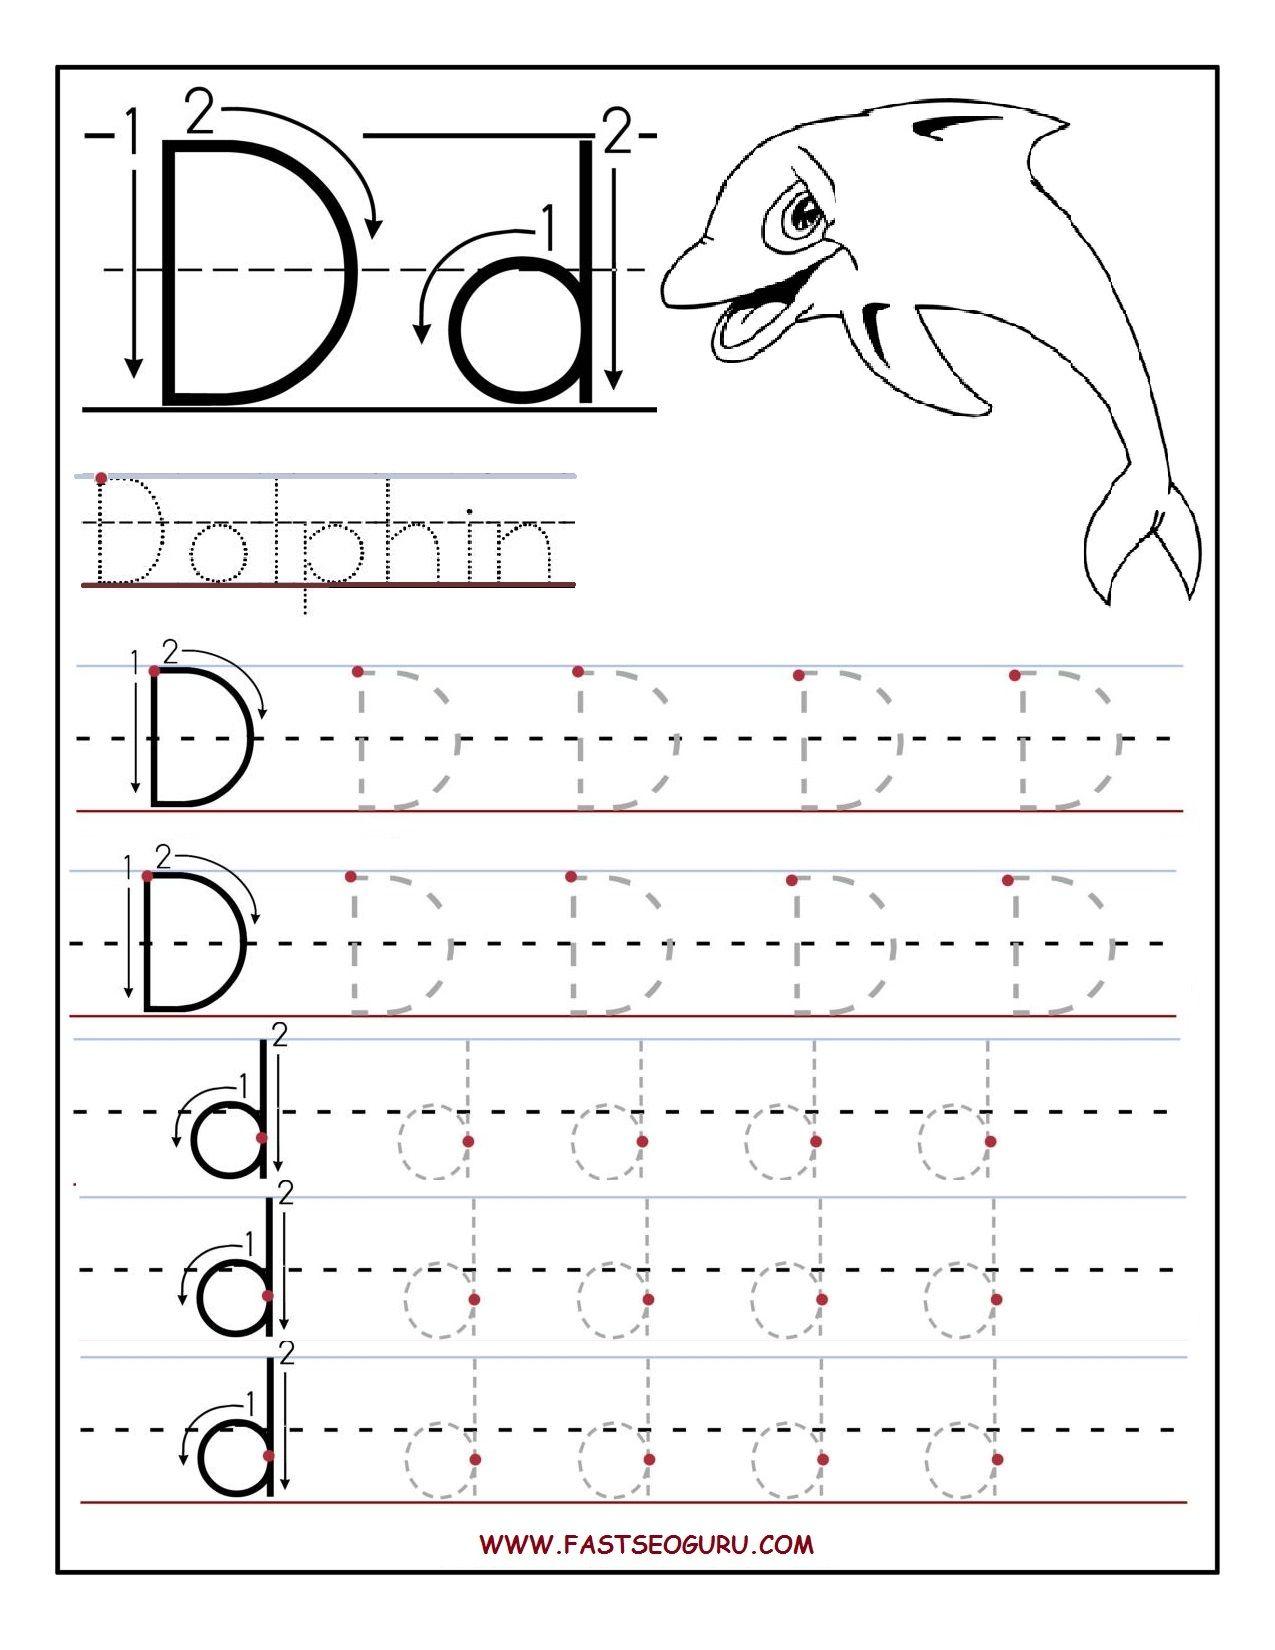 Preschool Alphabet Worksheets Printables Printable Letter A throughout D Letter Tracing